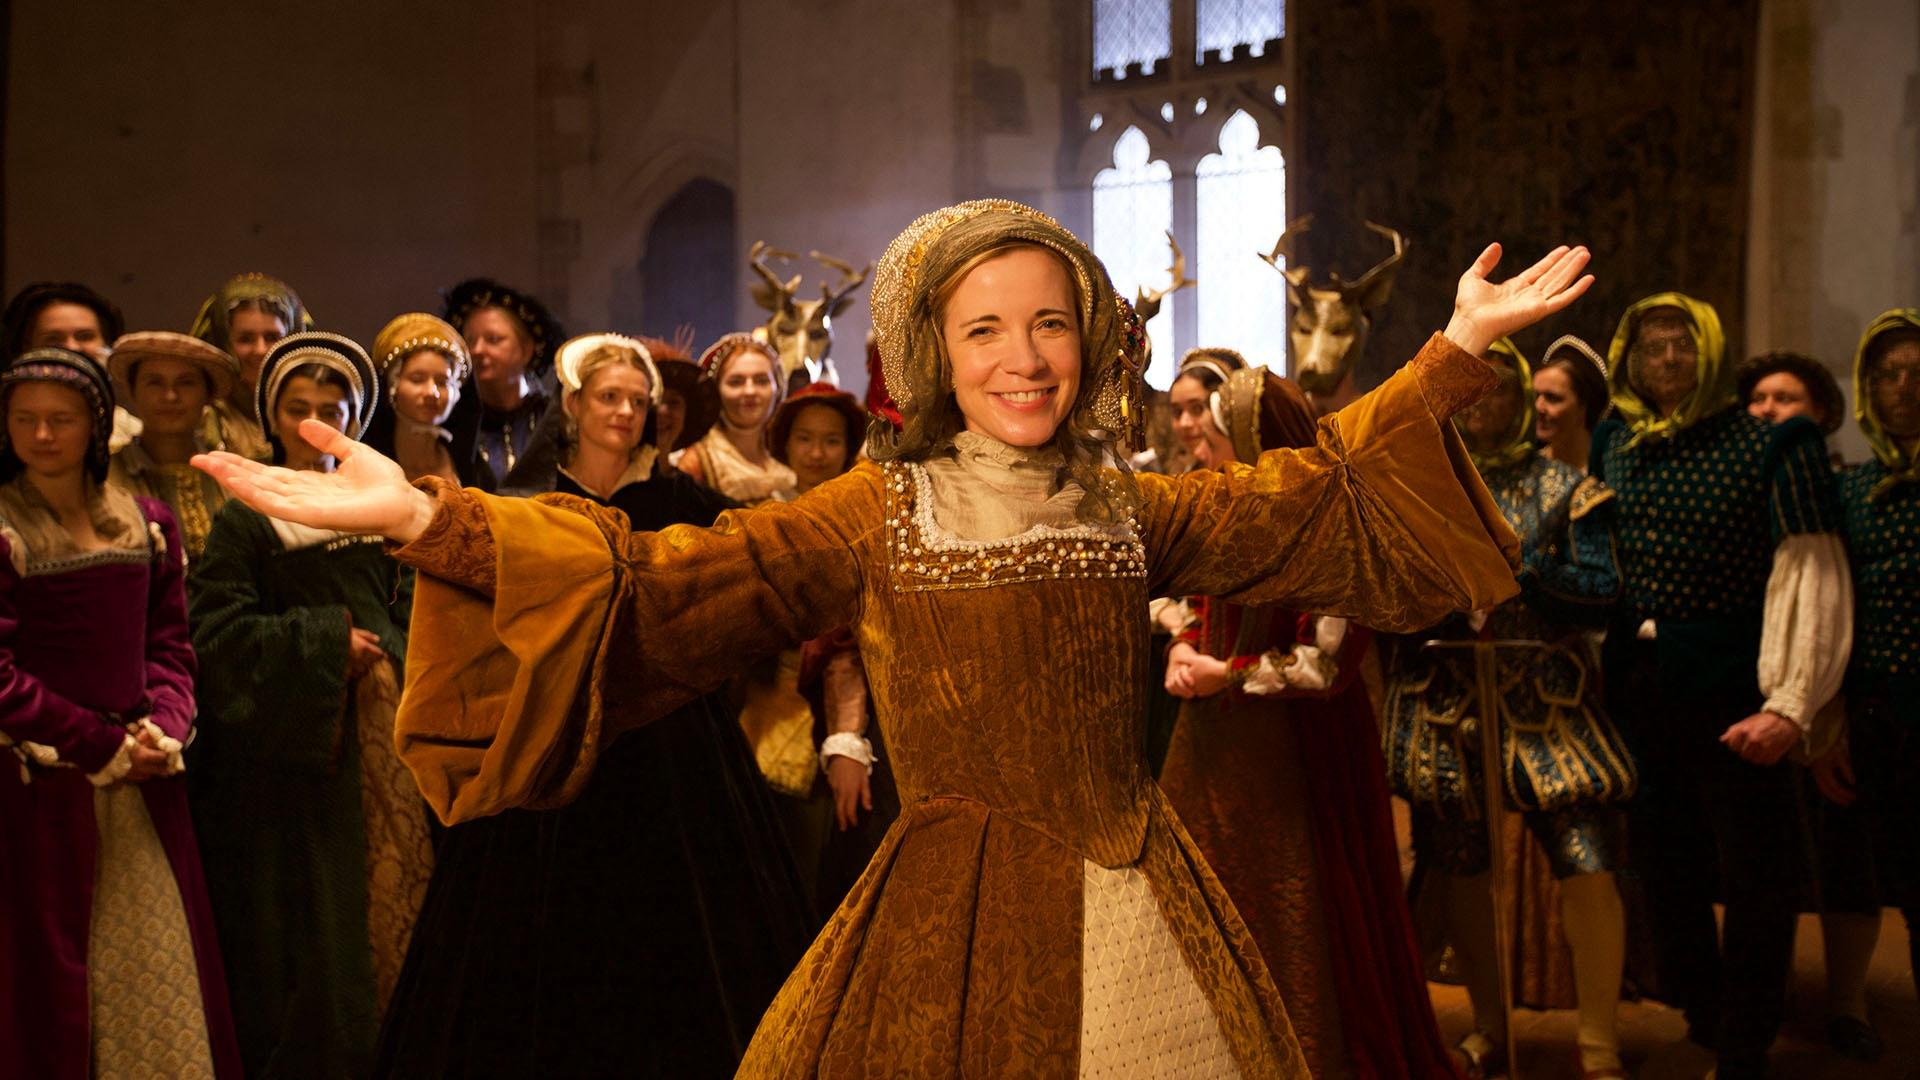 Image of Lucy Worsley dressed in an extravagant Tudor lady costume.